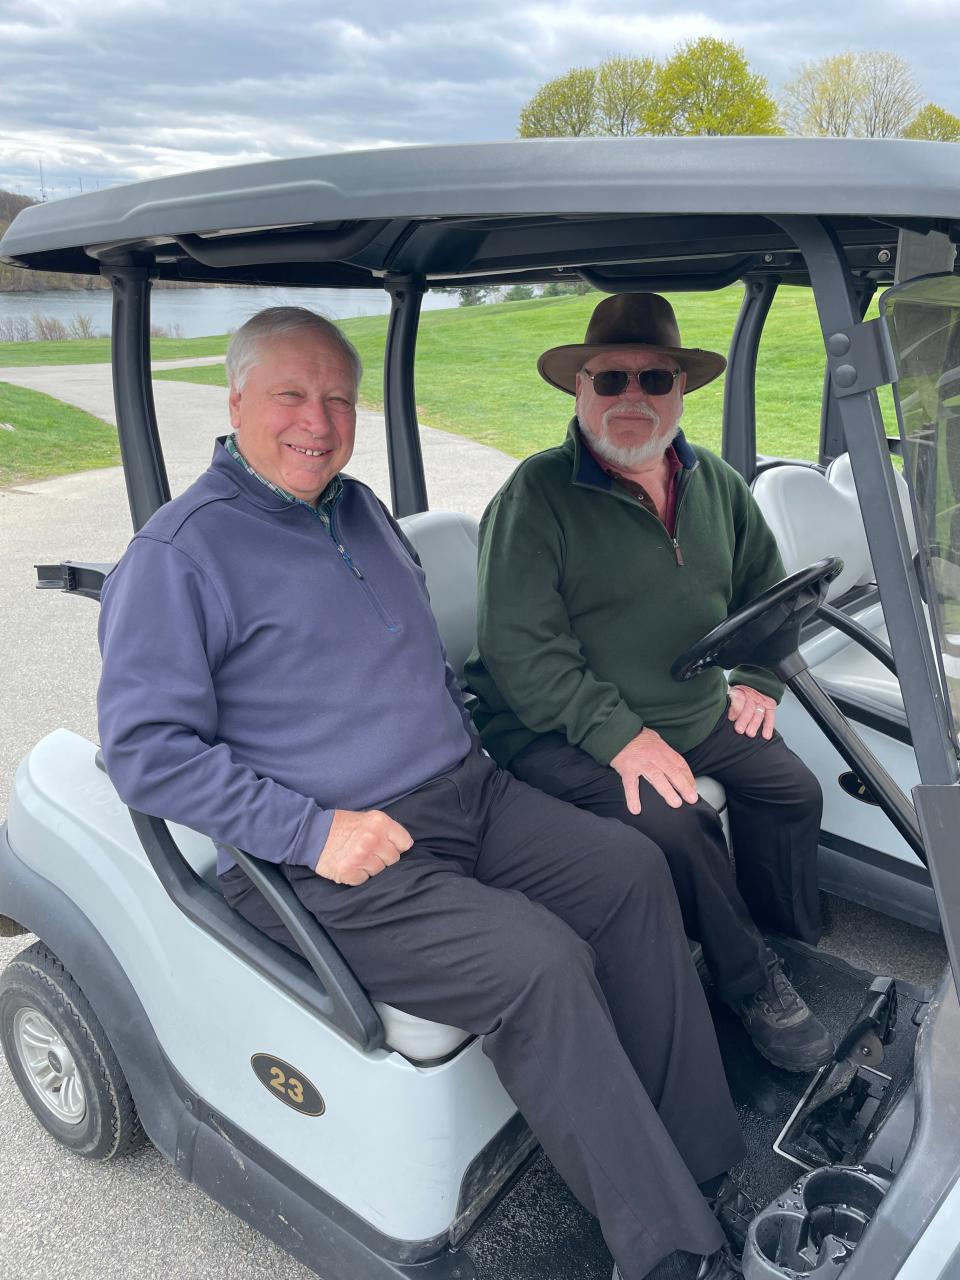 From left, Tom Mullins and Paul Cummings have organized golf trips in New England and down south for three decades.